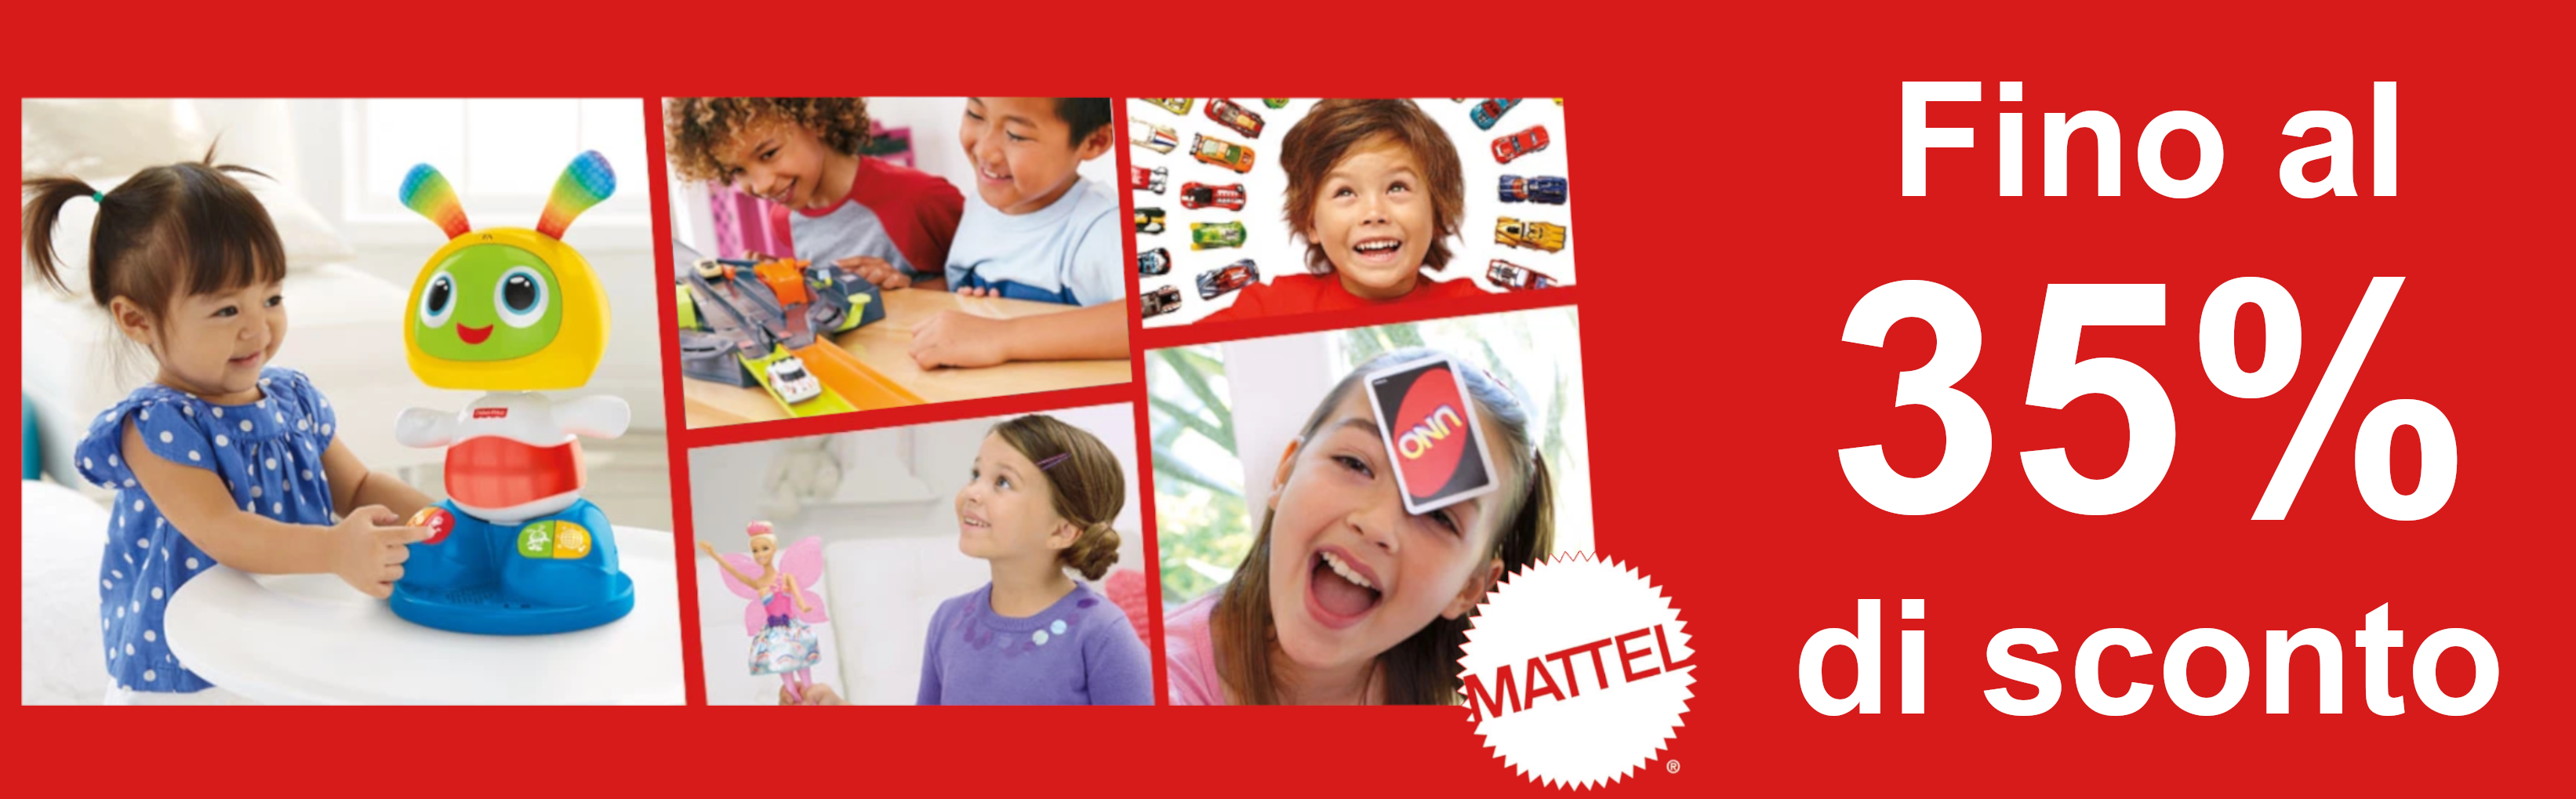 Banner Mattel - Discover our discounts!